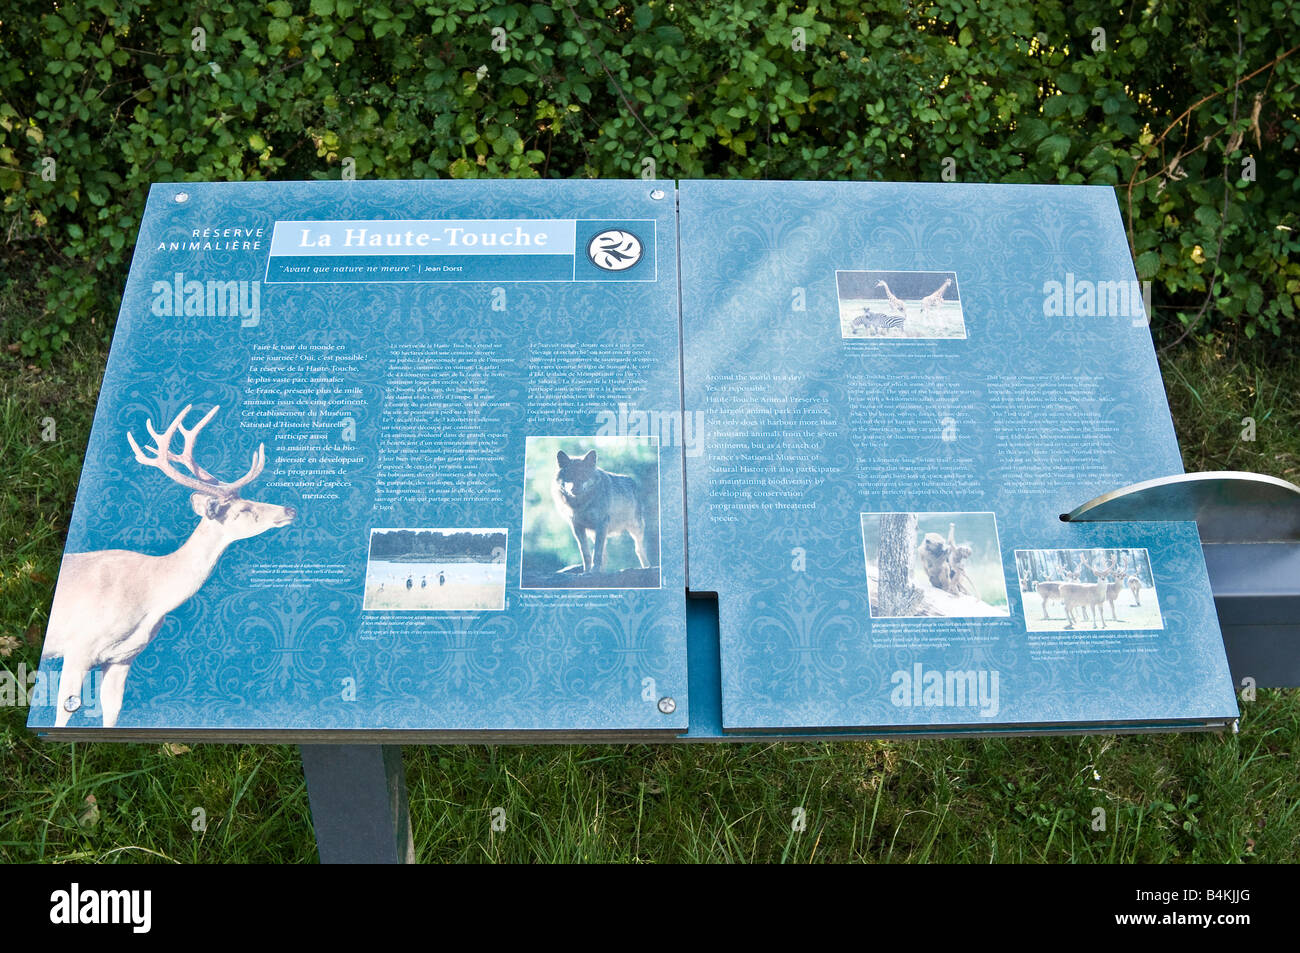 General information sign, La Haute-Touche zoo, Indre, France. Stock Photo